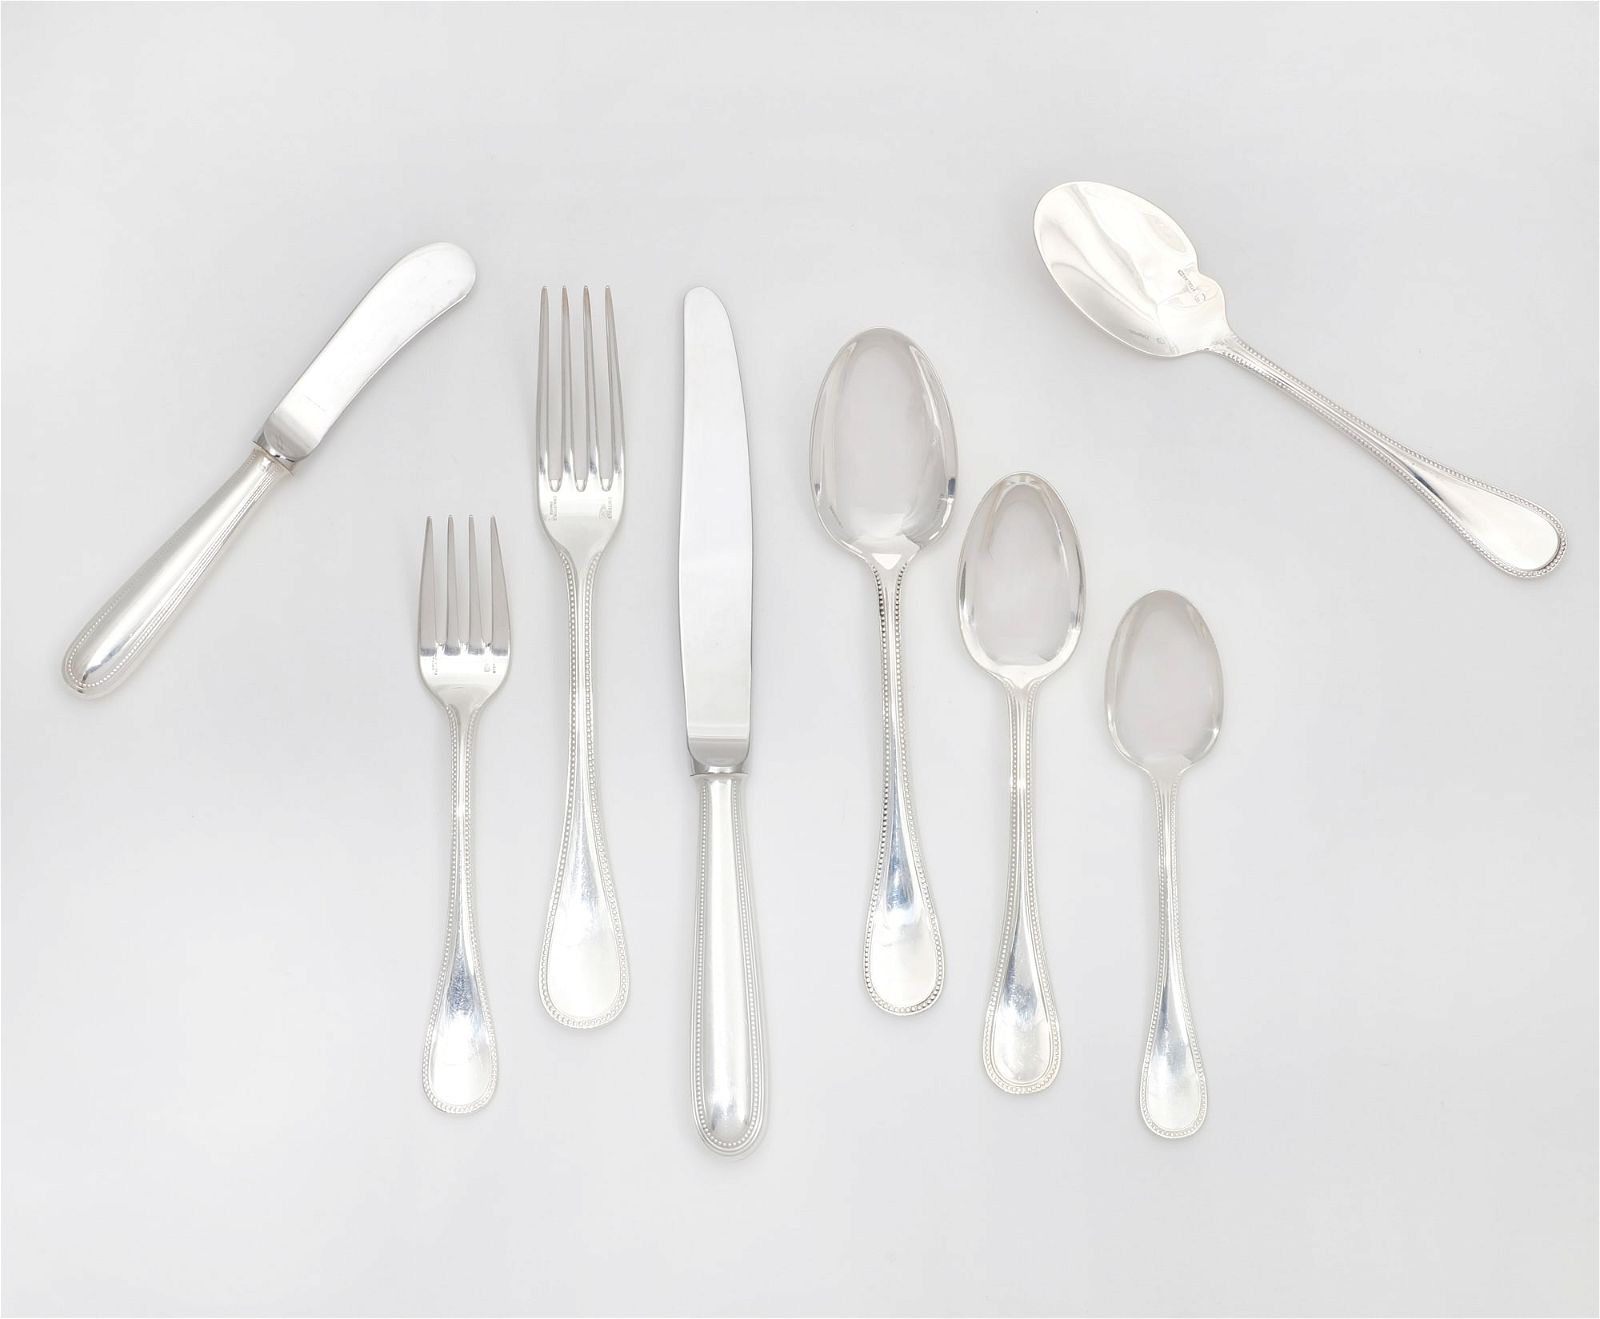 A CHRISTOFLE STERLING PERLES FLATWARE